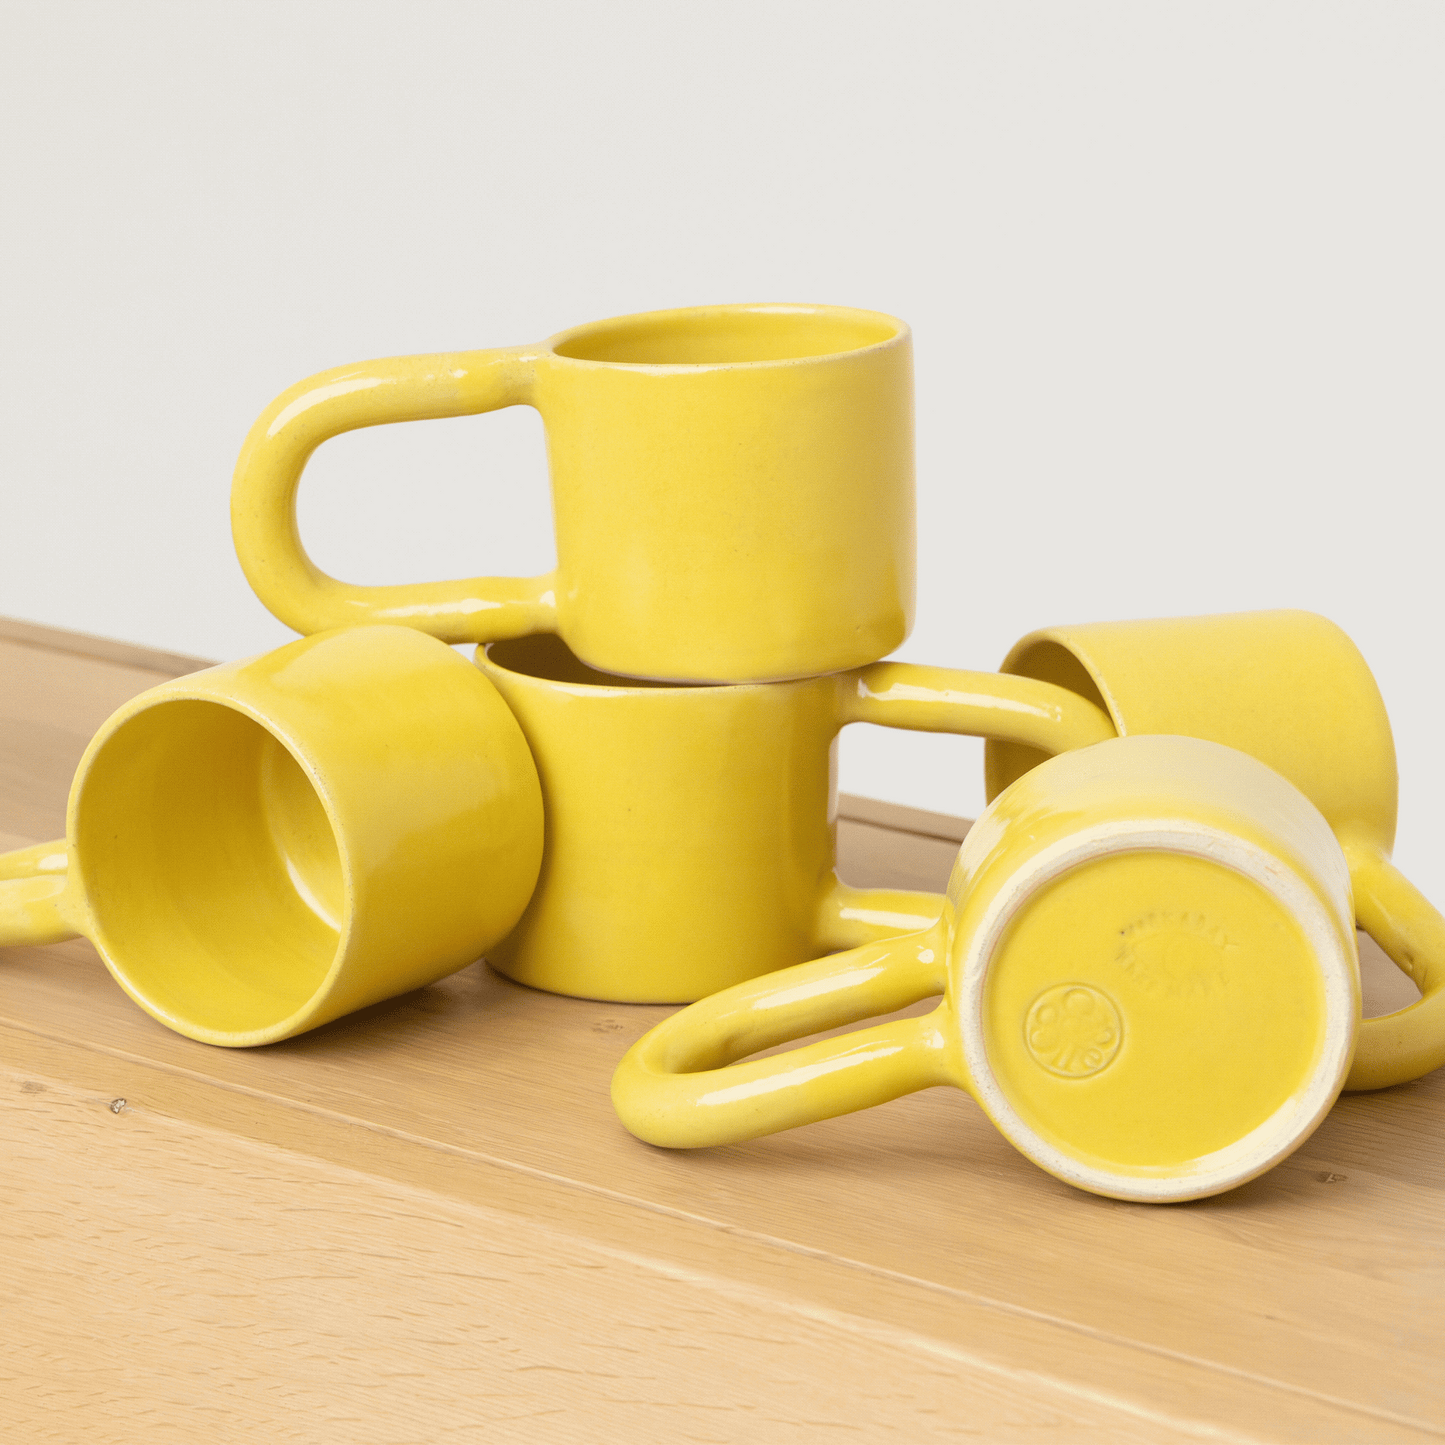 CoCollect x Workaday Mugs